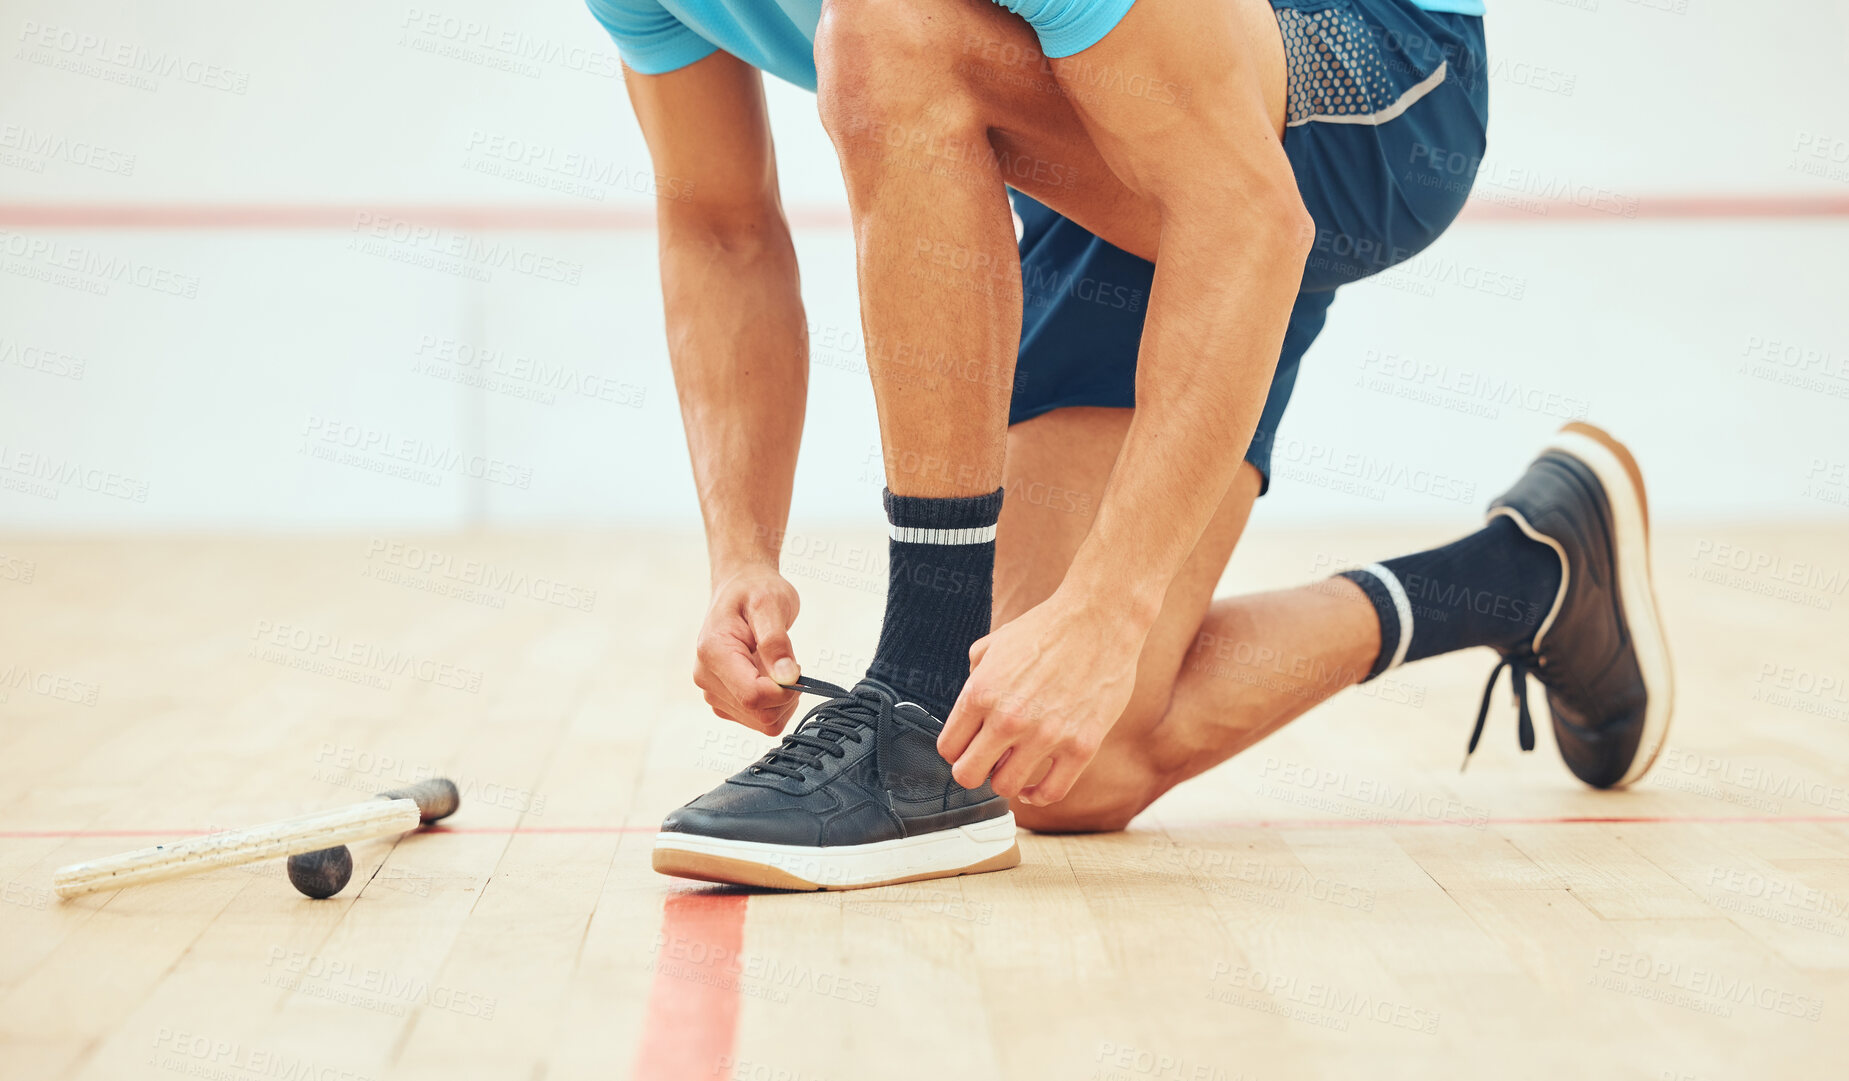 Buy stock photo Unknown athletic squash player kneeling and tying shoelaces before playing court game. Fit active mixed race athlete crouching and getting ready for training practice at sport centre. Sporty hispanic